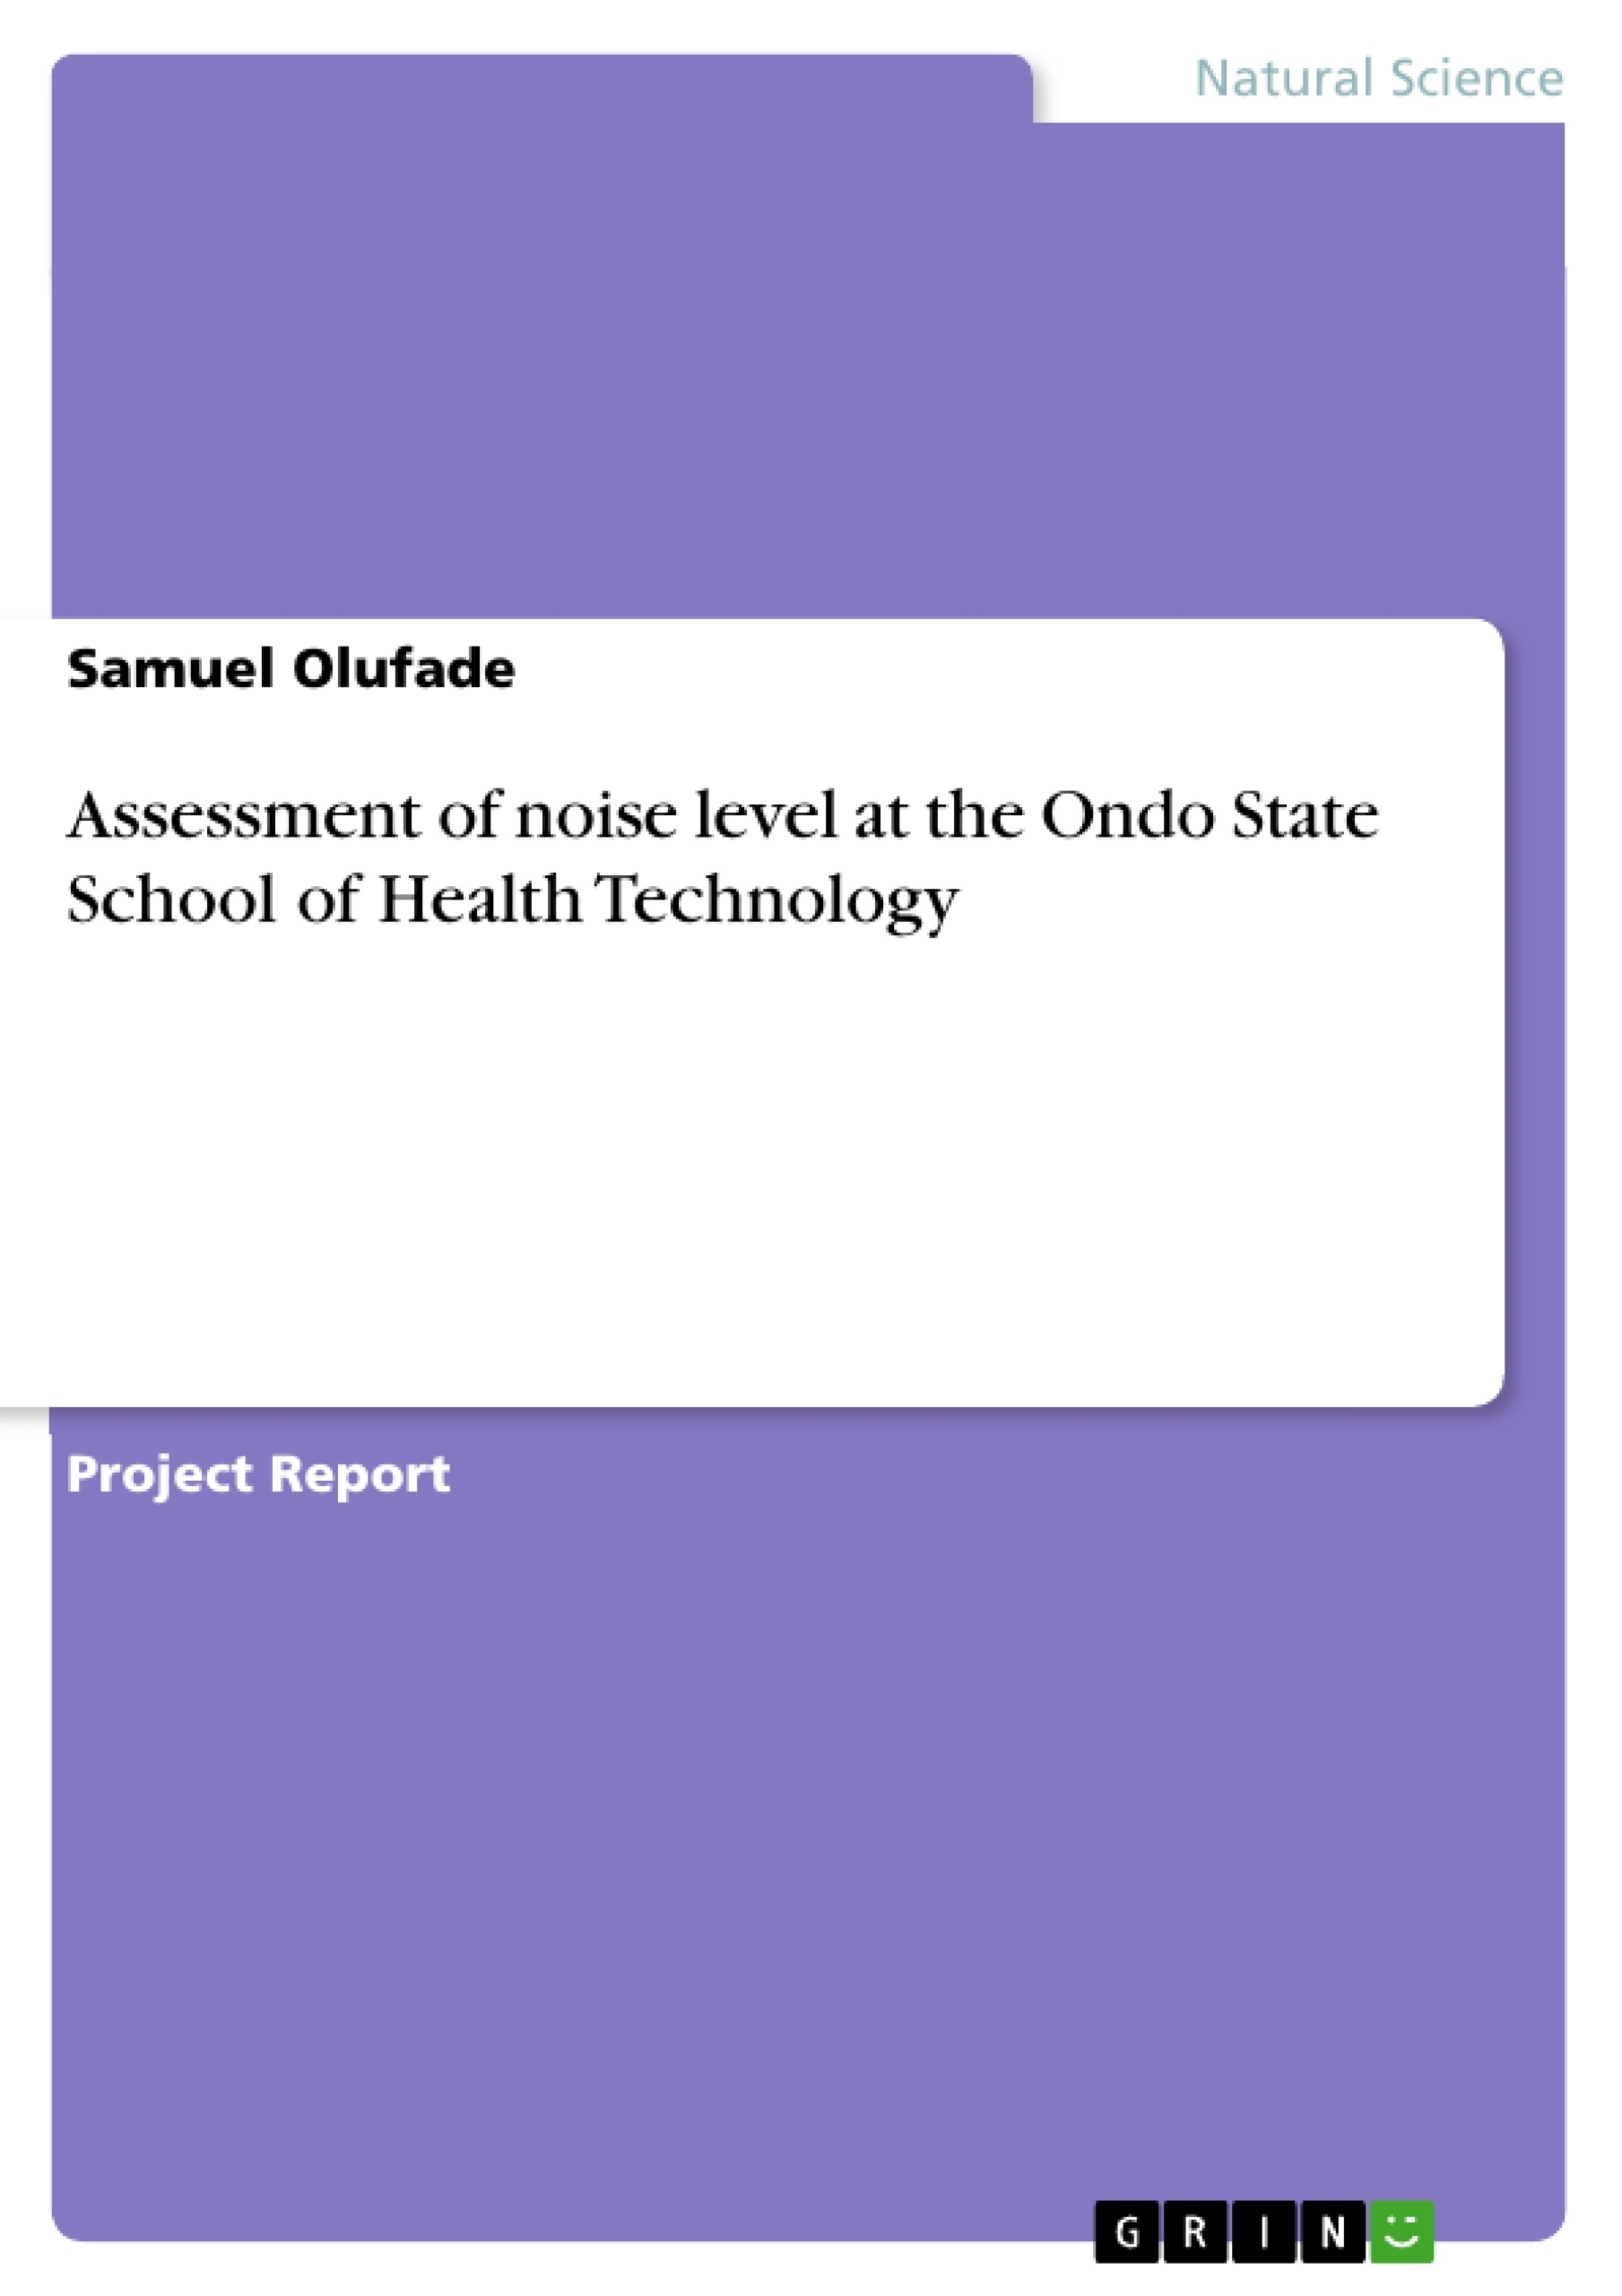 Title: Assessment of noise level at the Ondo State School of Health Technology